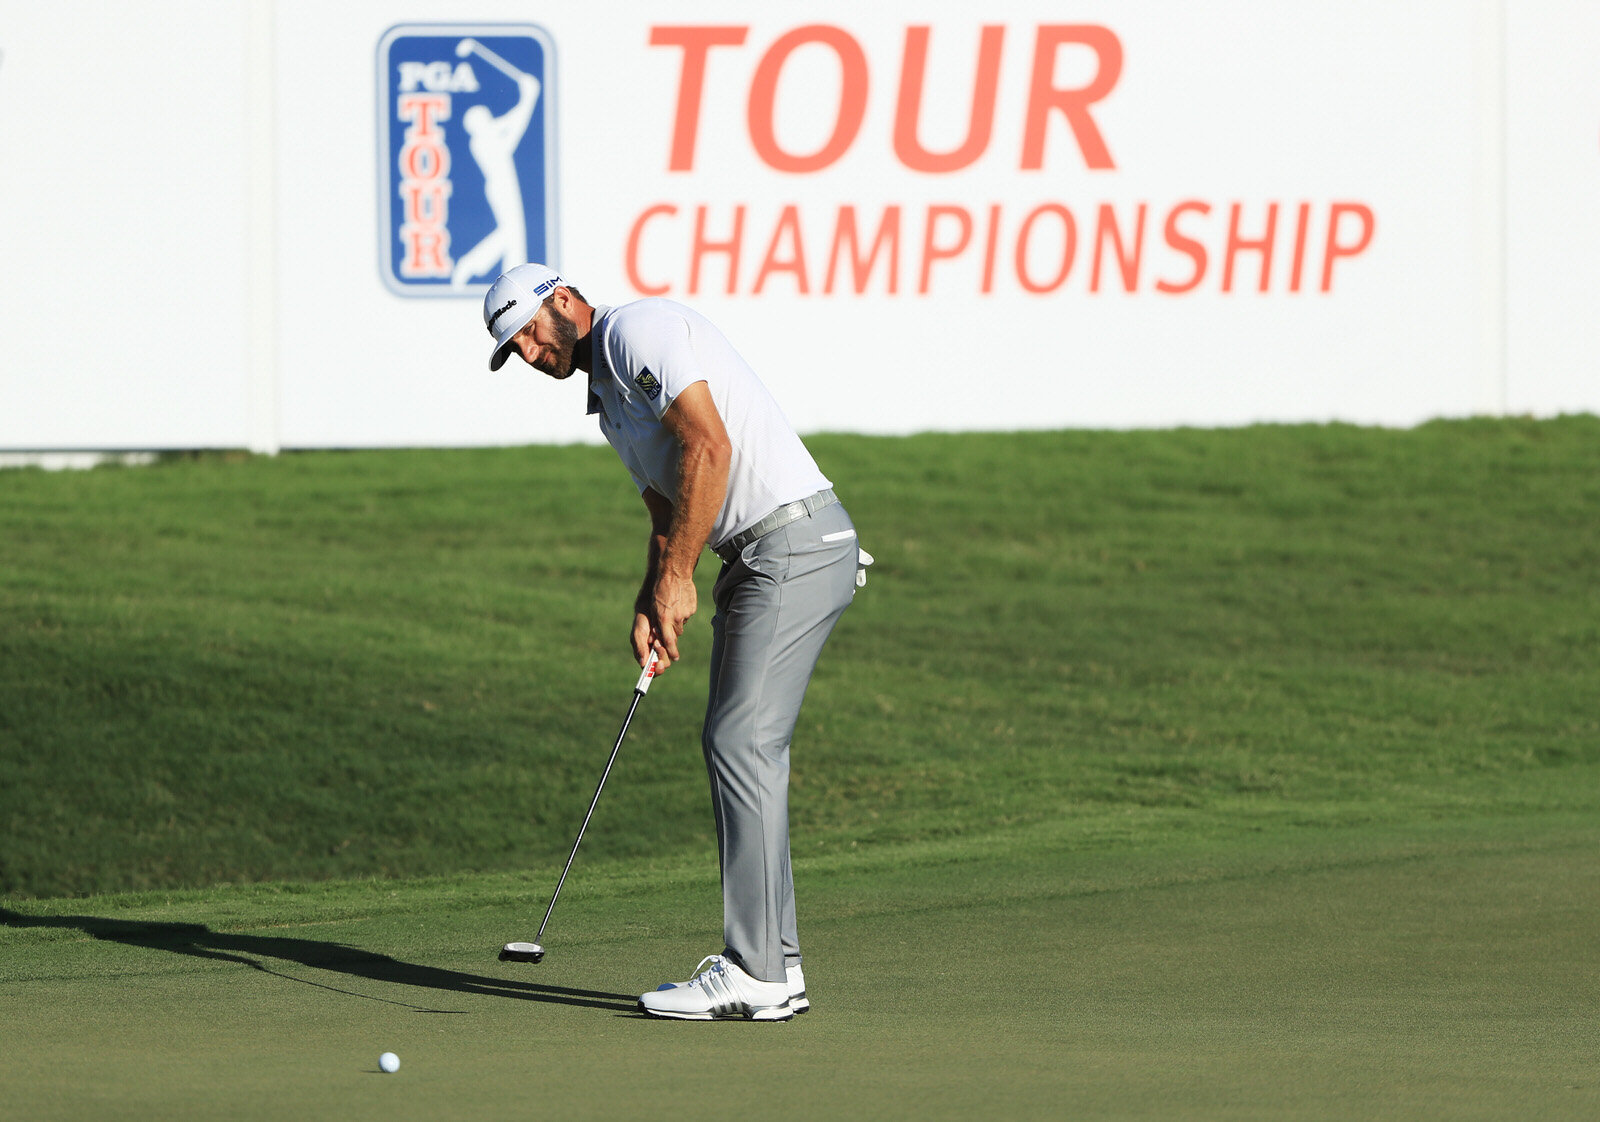  ATLANTA, GEORGIA - SEPTEMBER 05: Dustin Johnson of the United States putts on the 18th green during the second round of the TOUR Championship at East Lake Golf Club on September 05, 2020 in Atlanta, Georgia. (Photo by Sam Greenwood/Getty Images) 